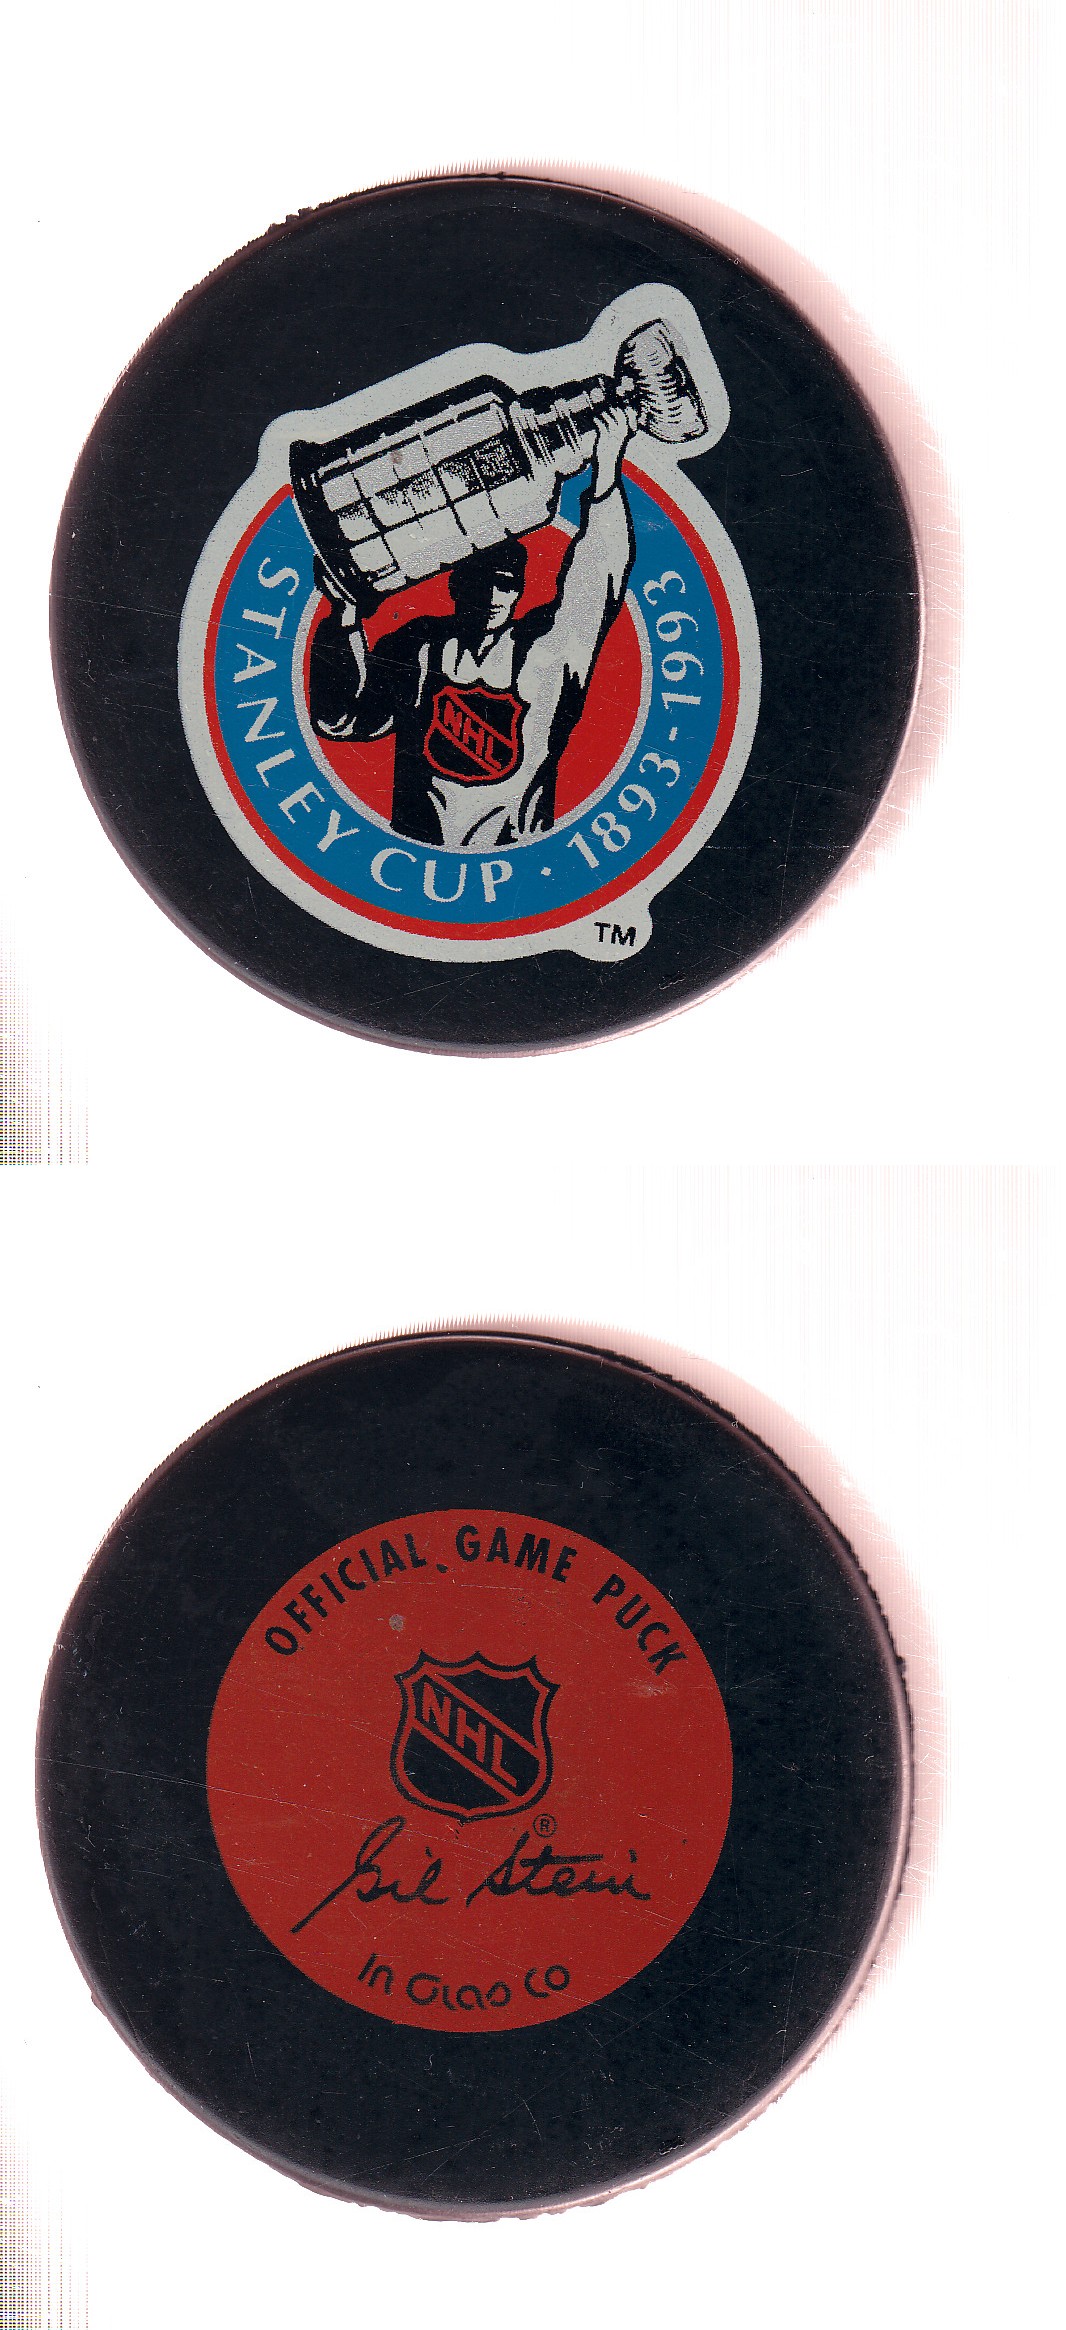 1992-93 IN GLAS CO NHL GAME PUCK photo